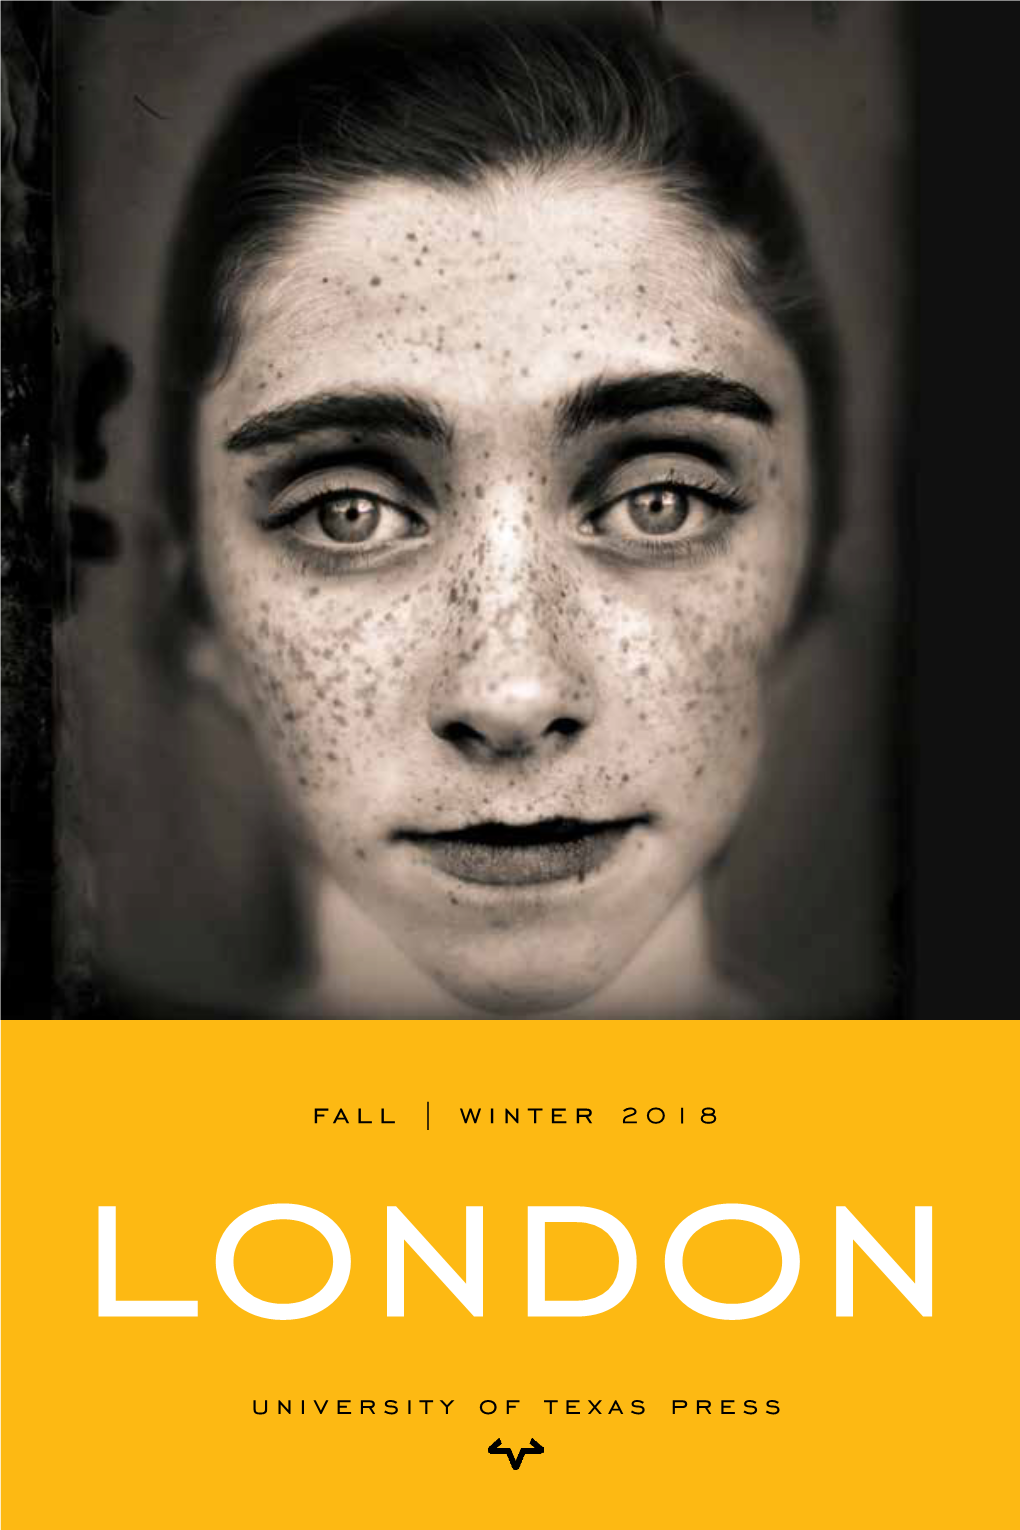 Fall | Winter 2018 London University of Texas Press | Index by Title | Contents the Street Philosophy of Garry Winogrand, Books .For .The .Trade